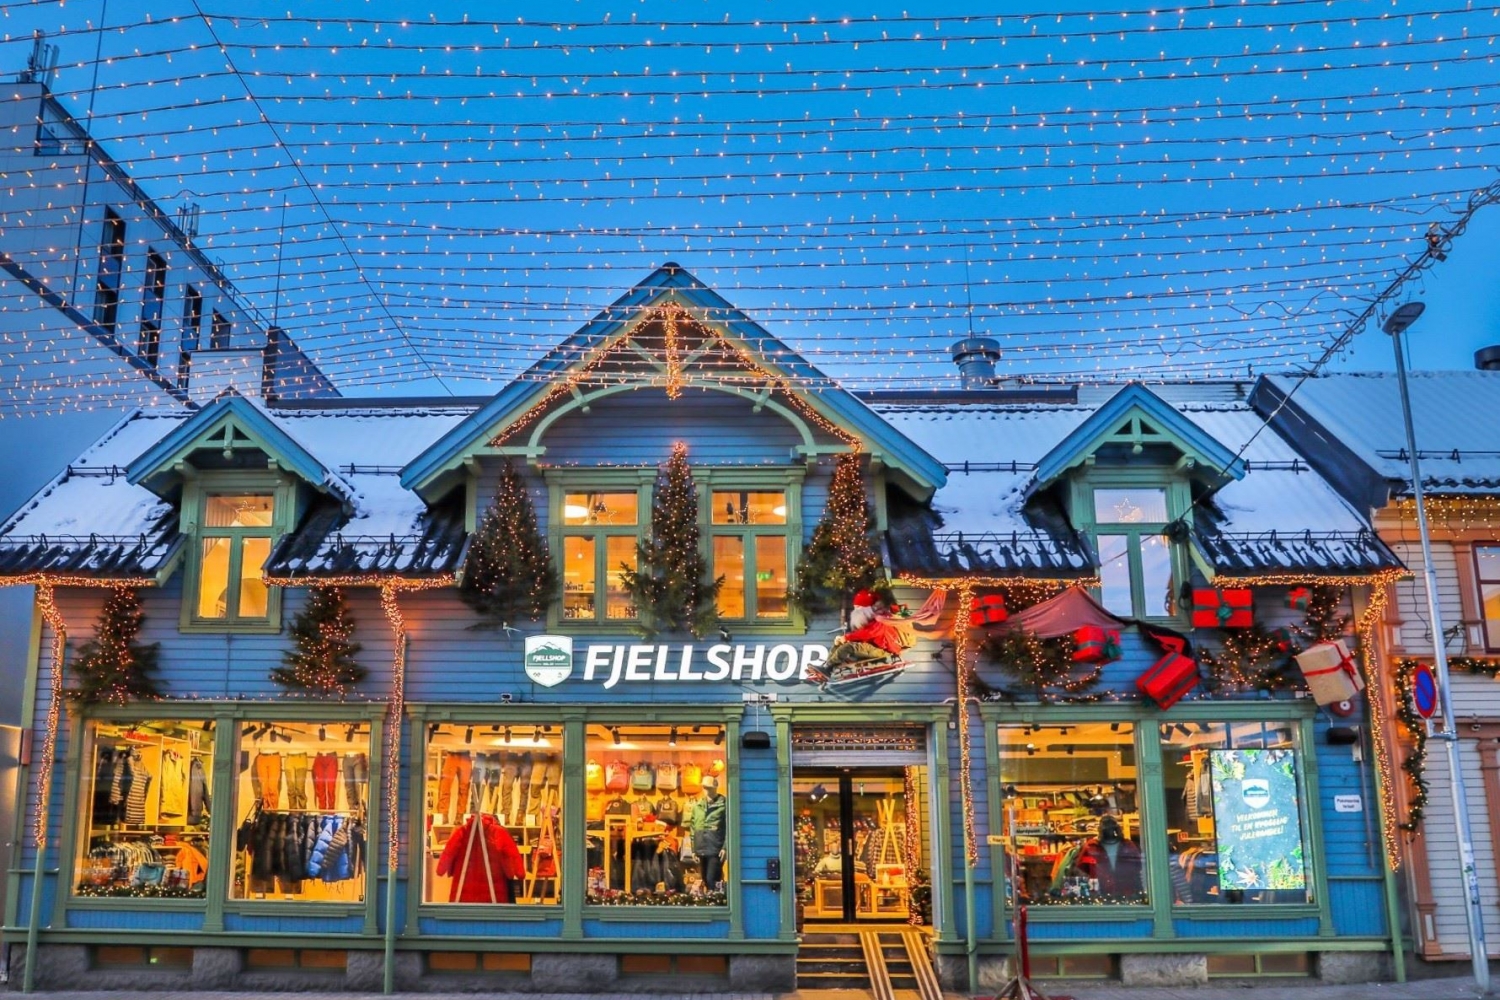 Fjellshop store from the entrance with Christmas decorations